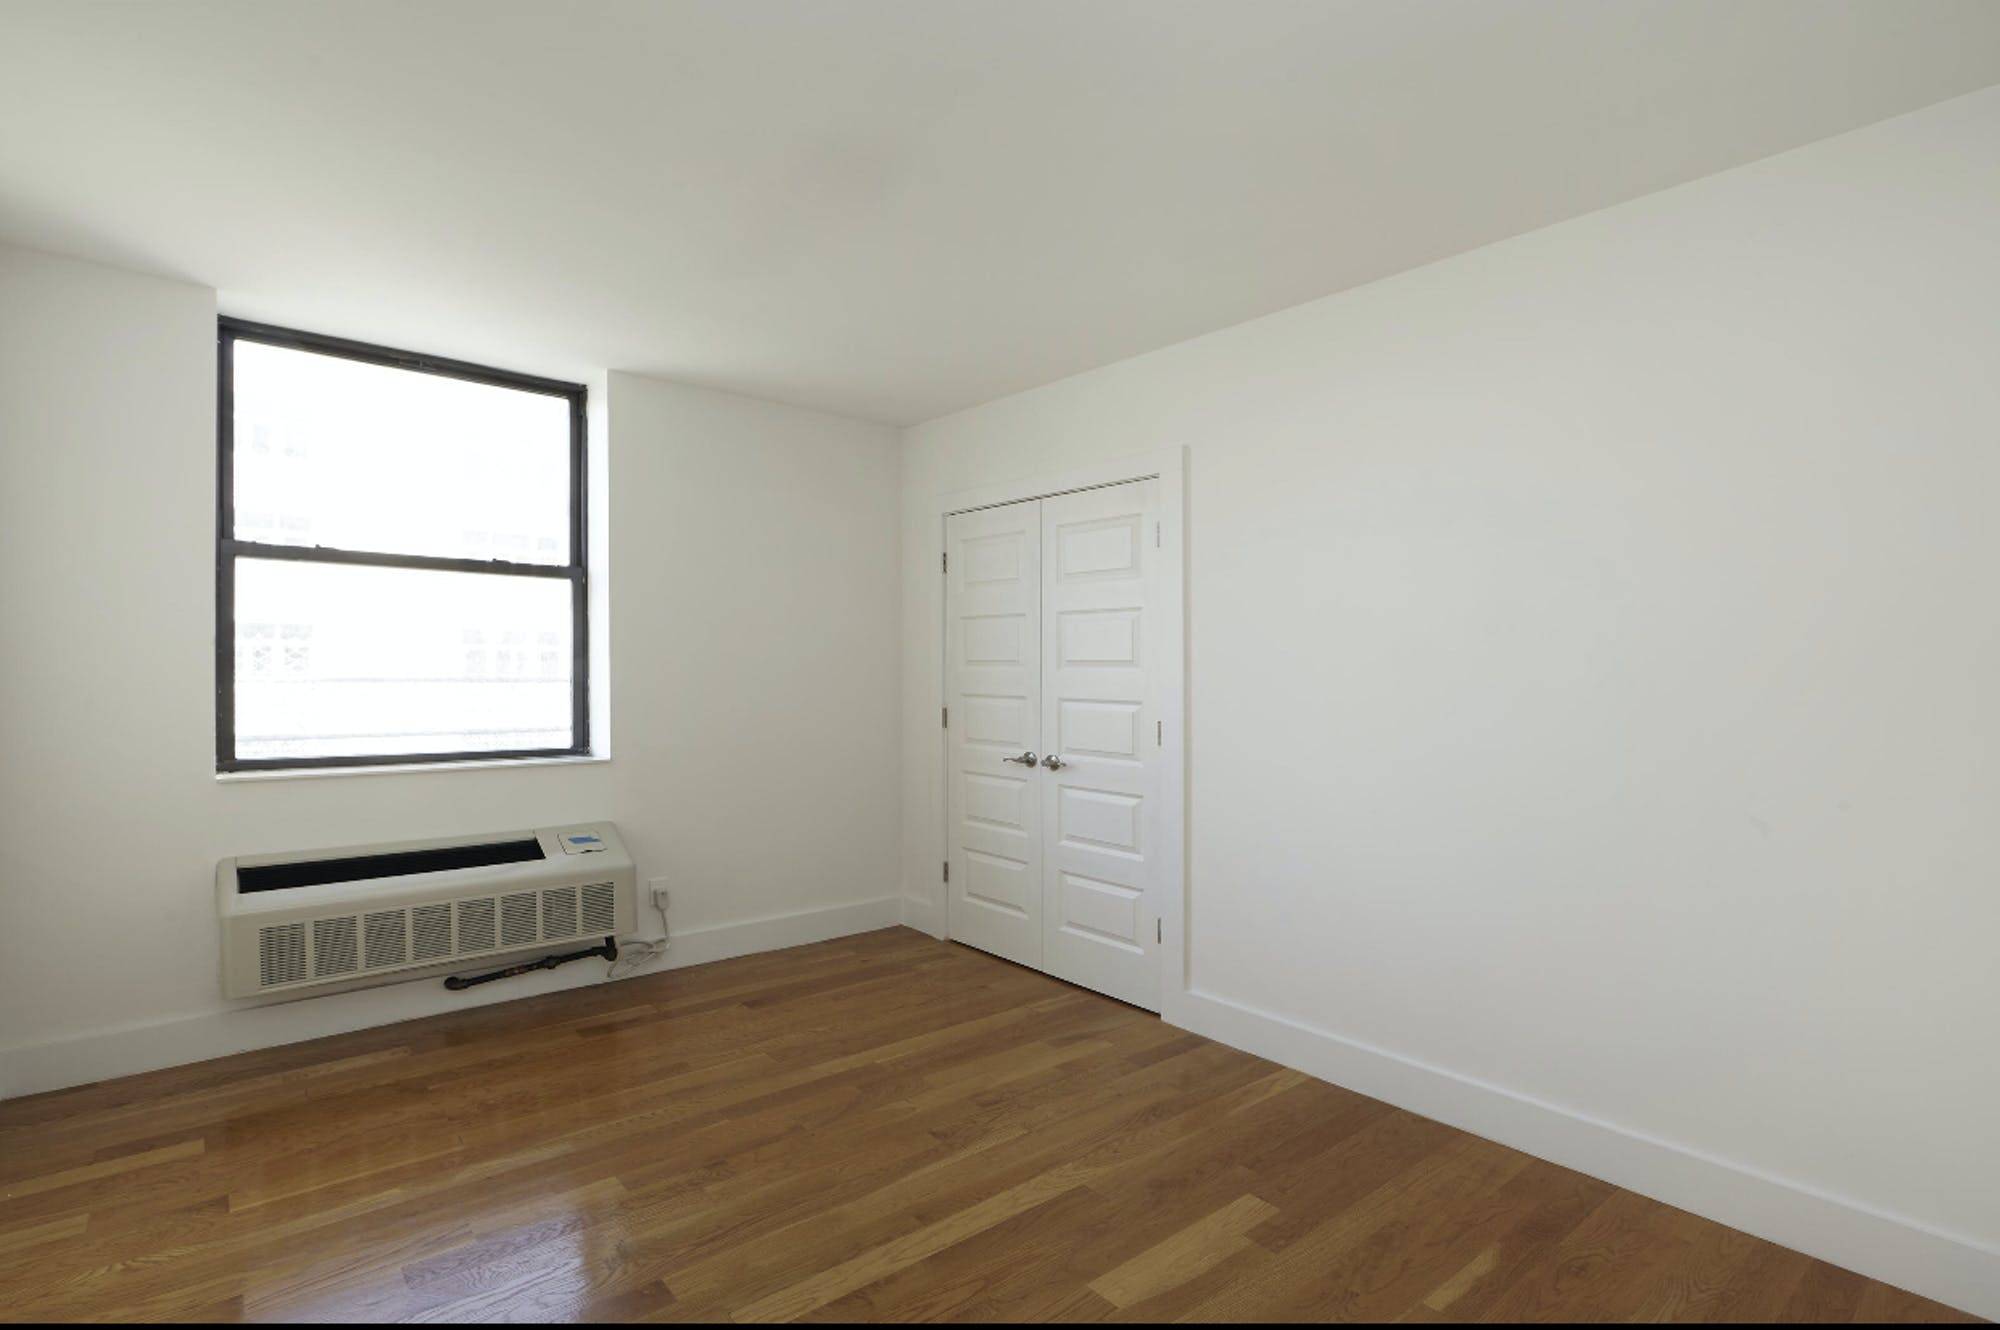 Welcome to Lofts QB ! This spacious corner 3 bedroom apartment is bright and sunny as it is refreshingly large.